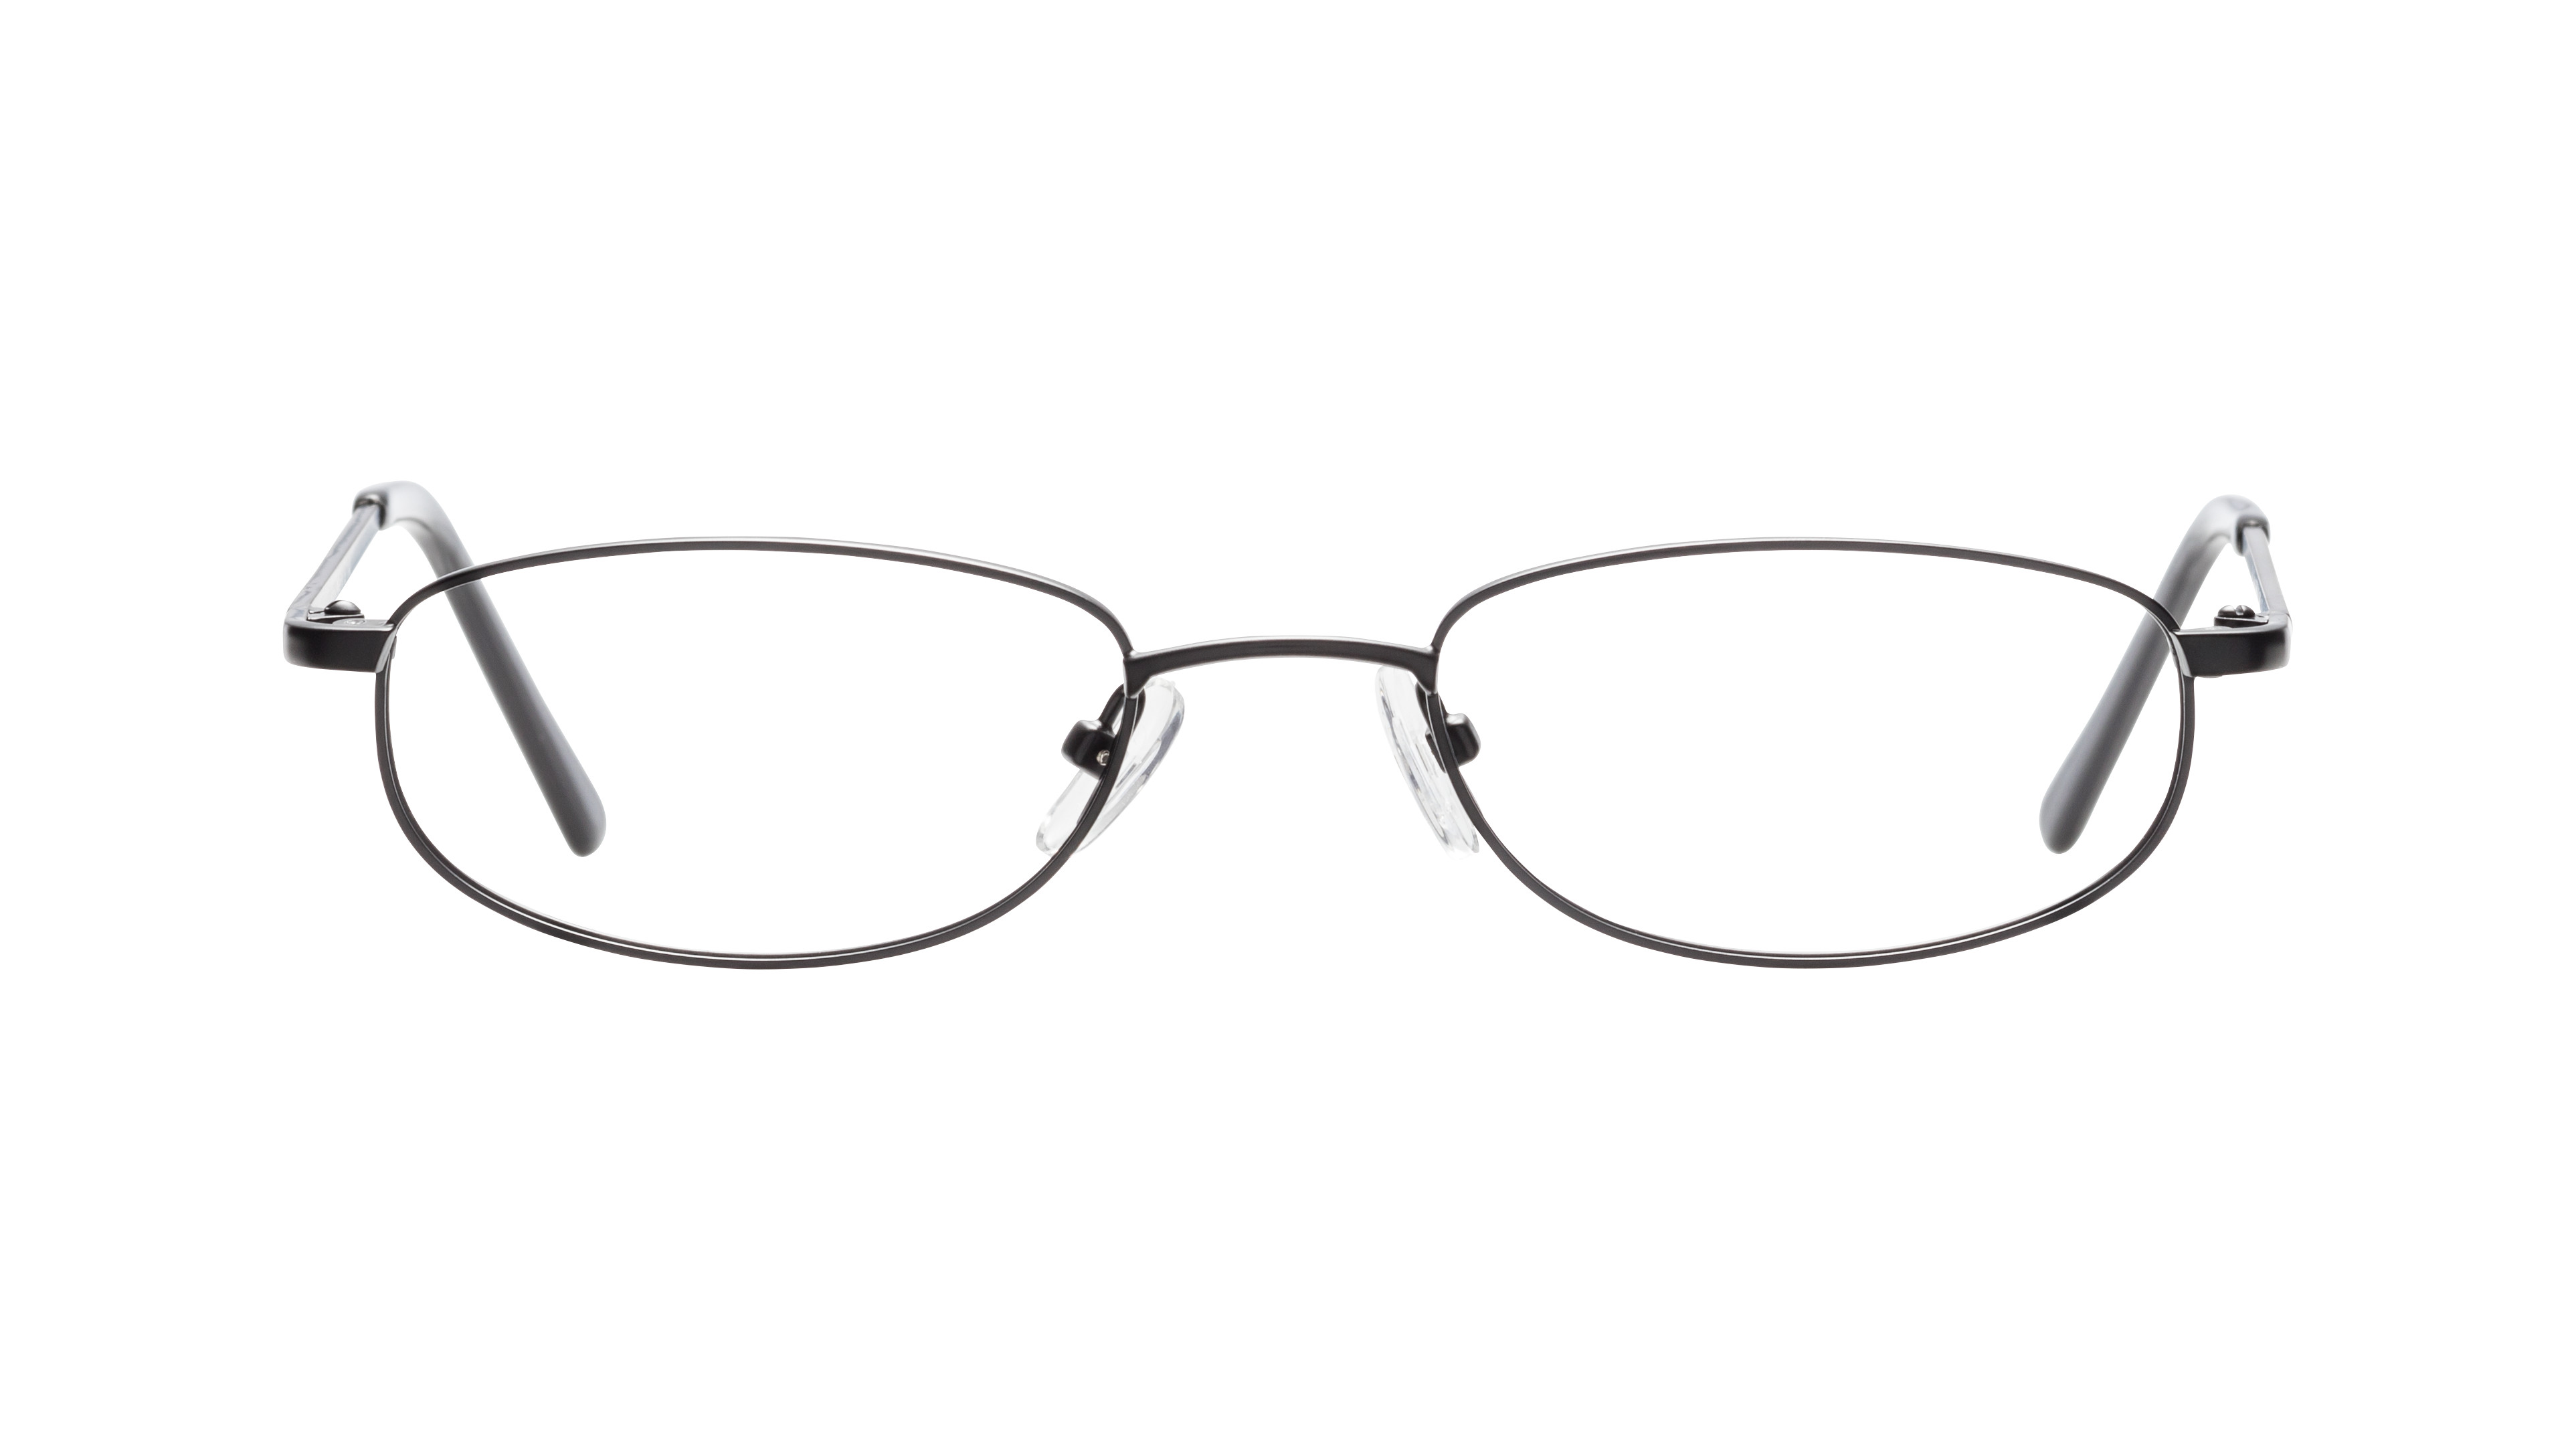 [products.image.front] GV Library HFBM01 BB Brille